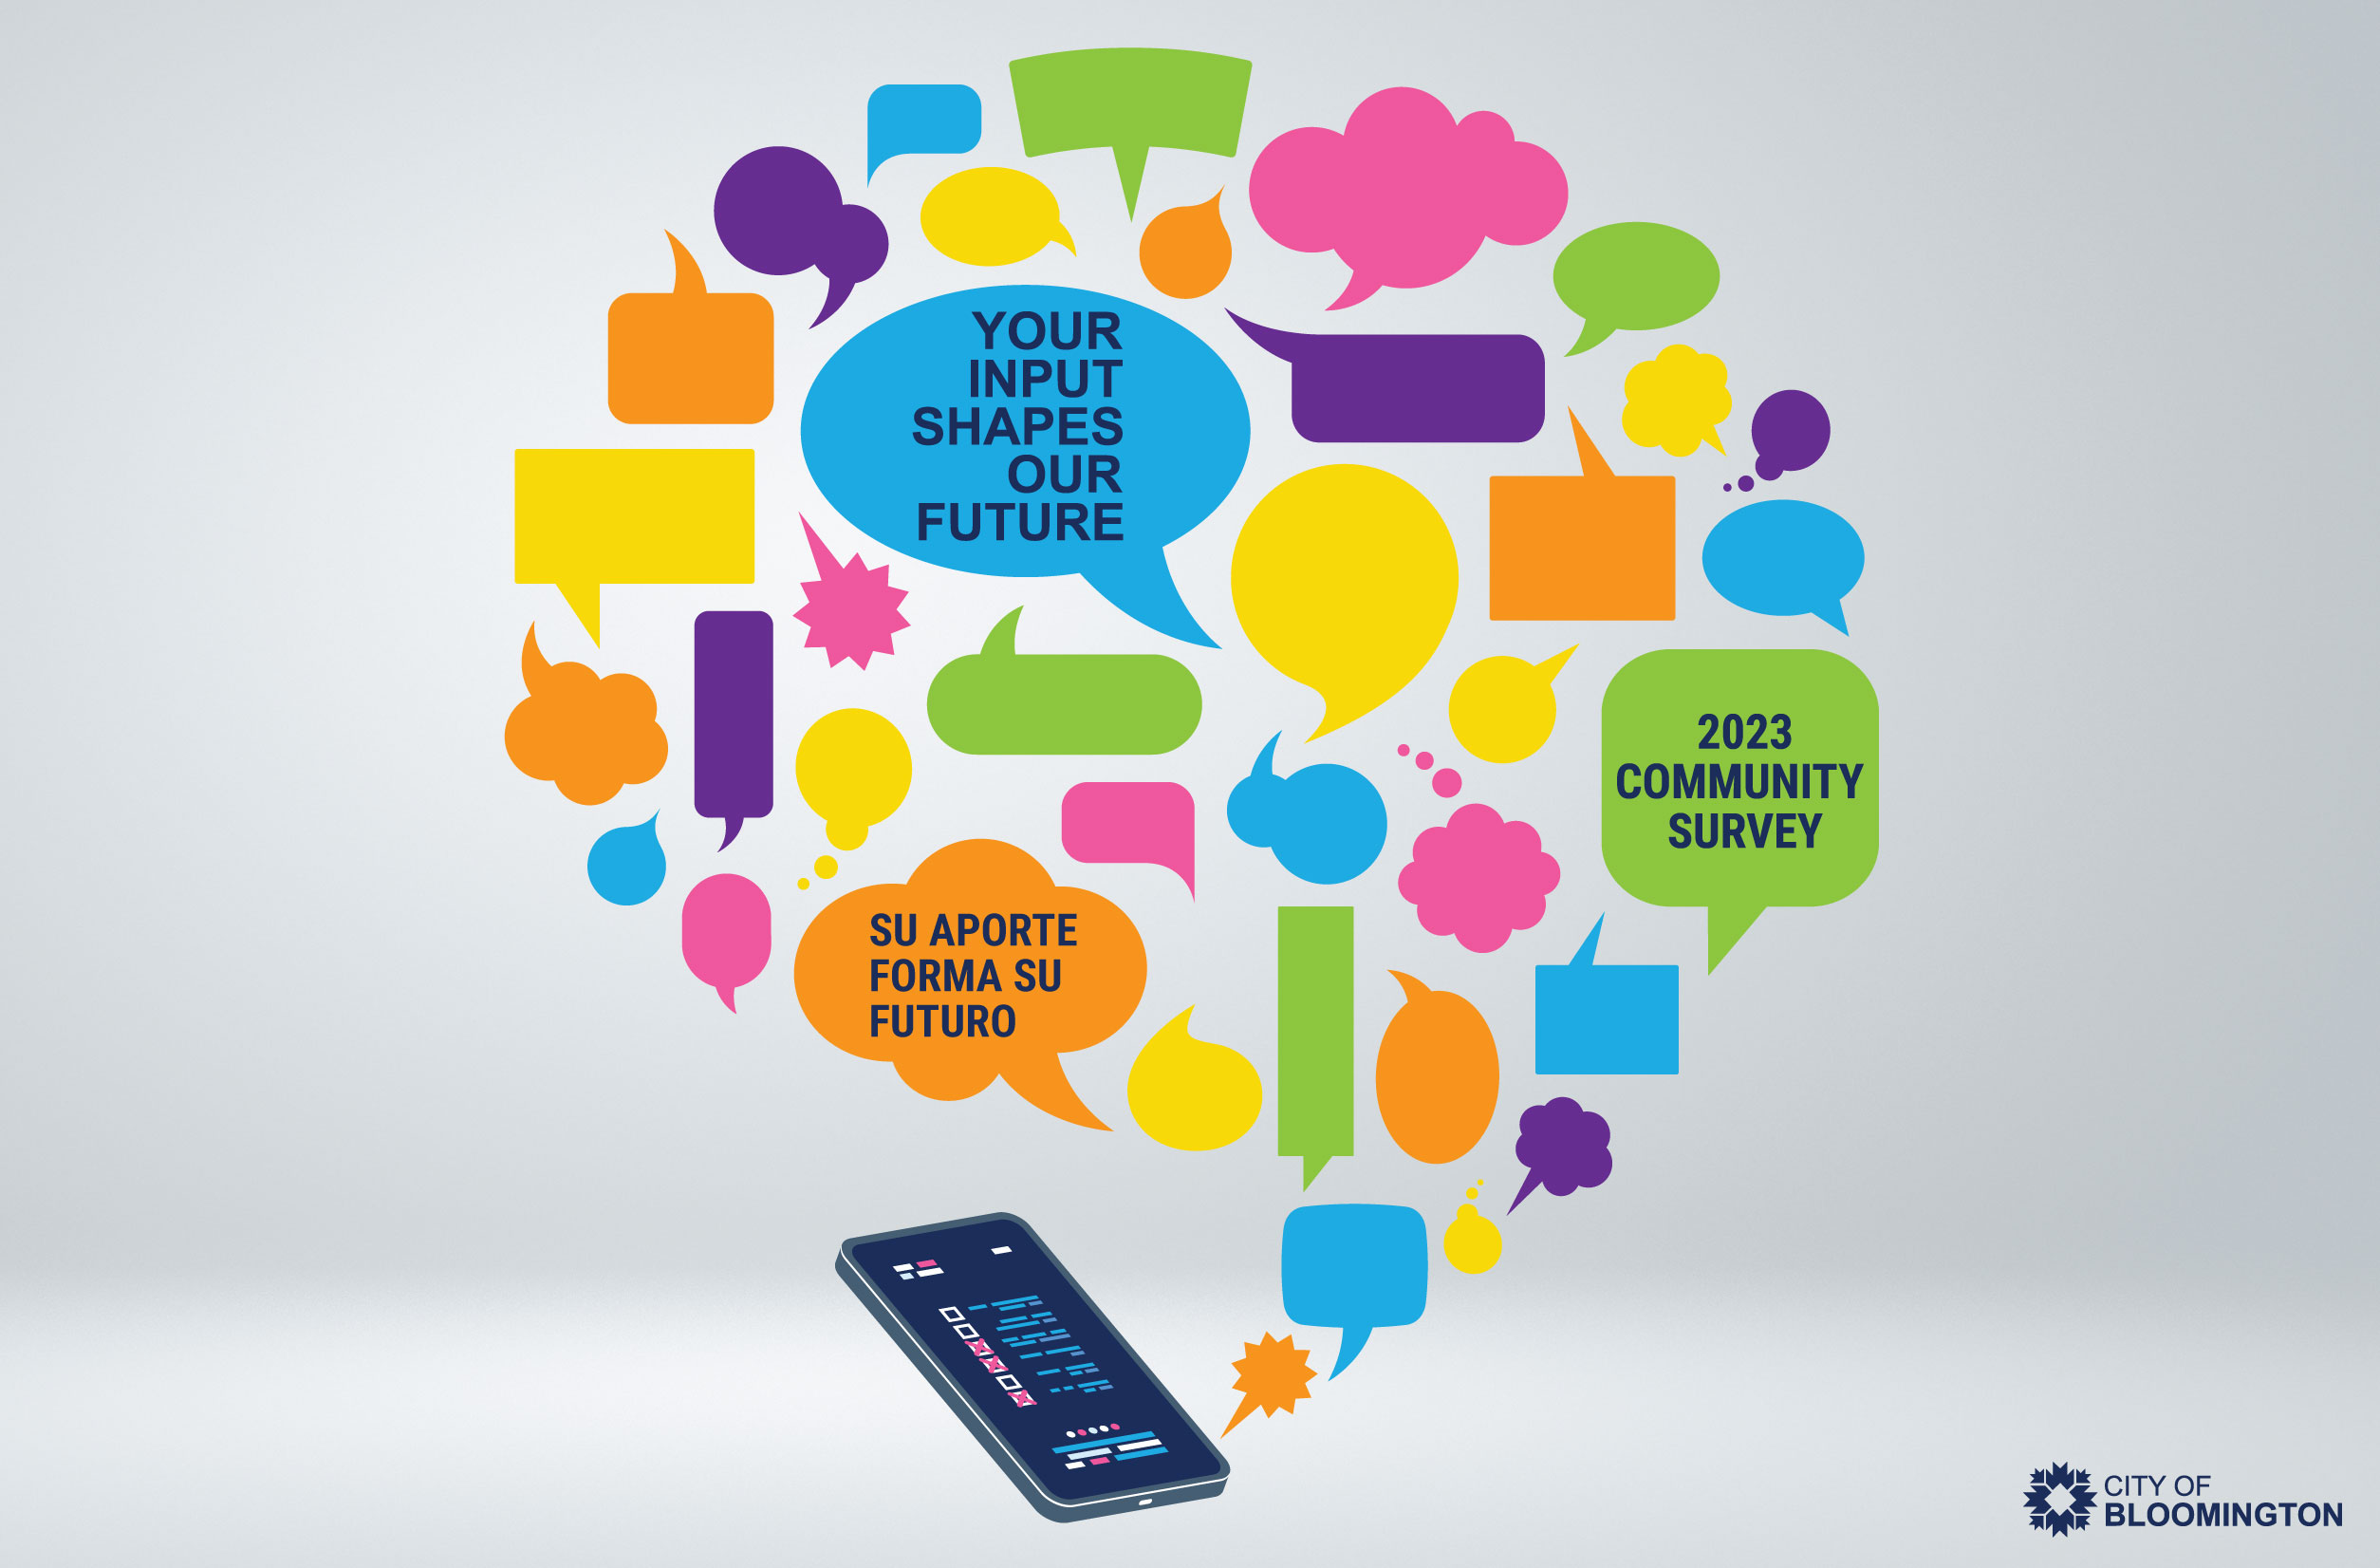 Speech bubbles in various bright colors hovering over graphic of smartphone on a gray background